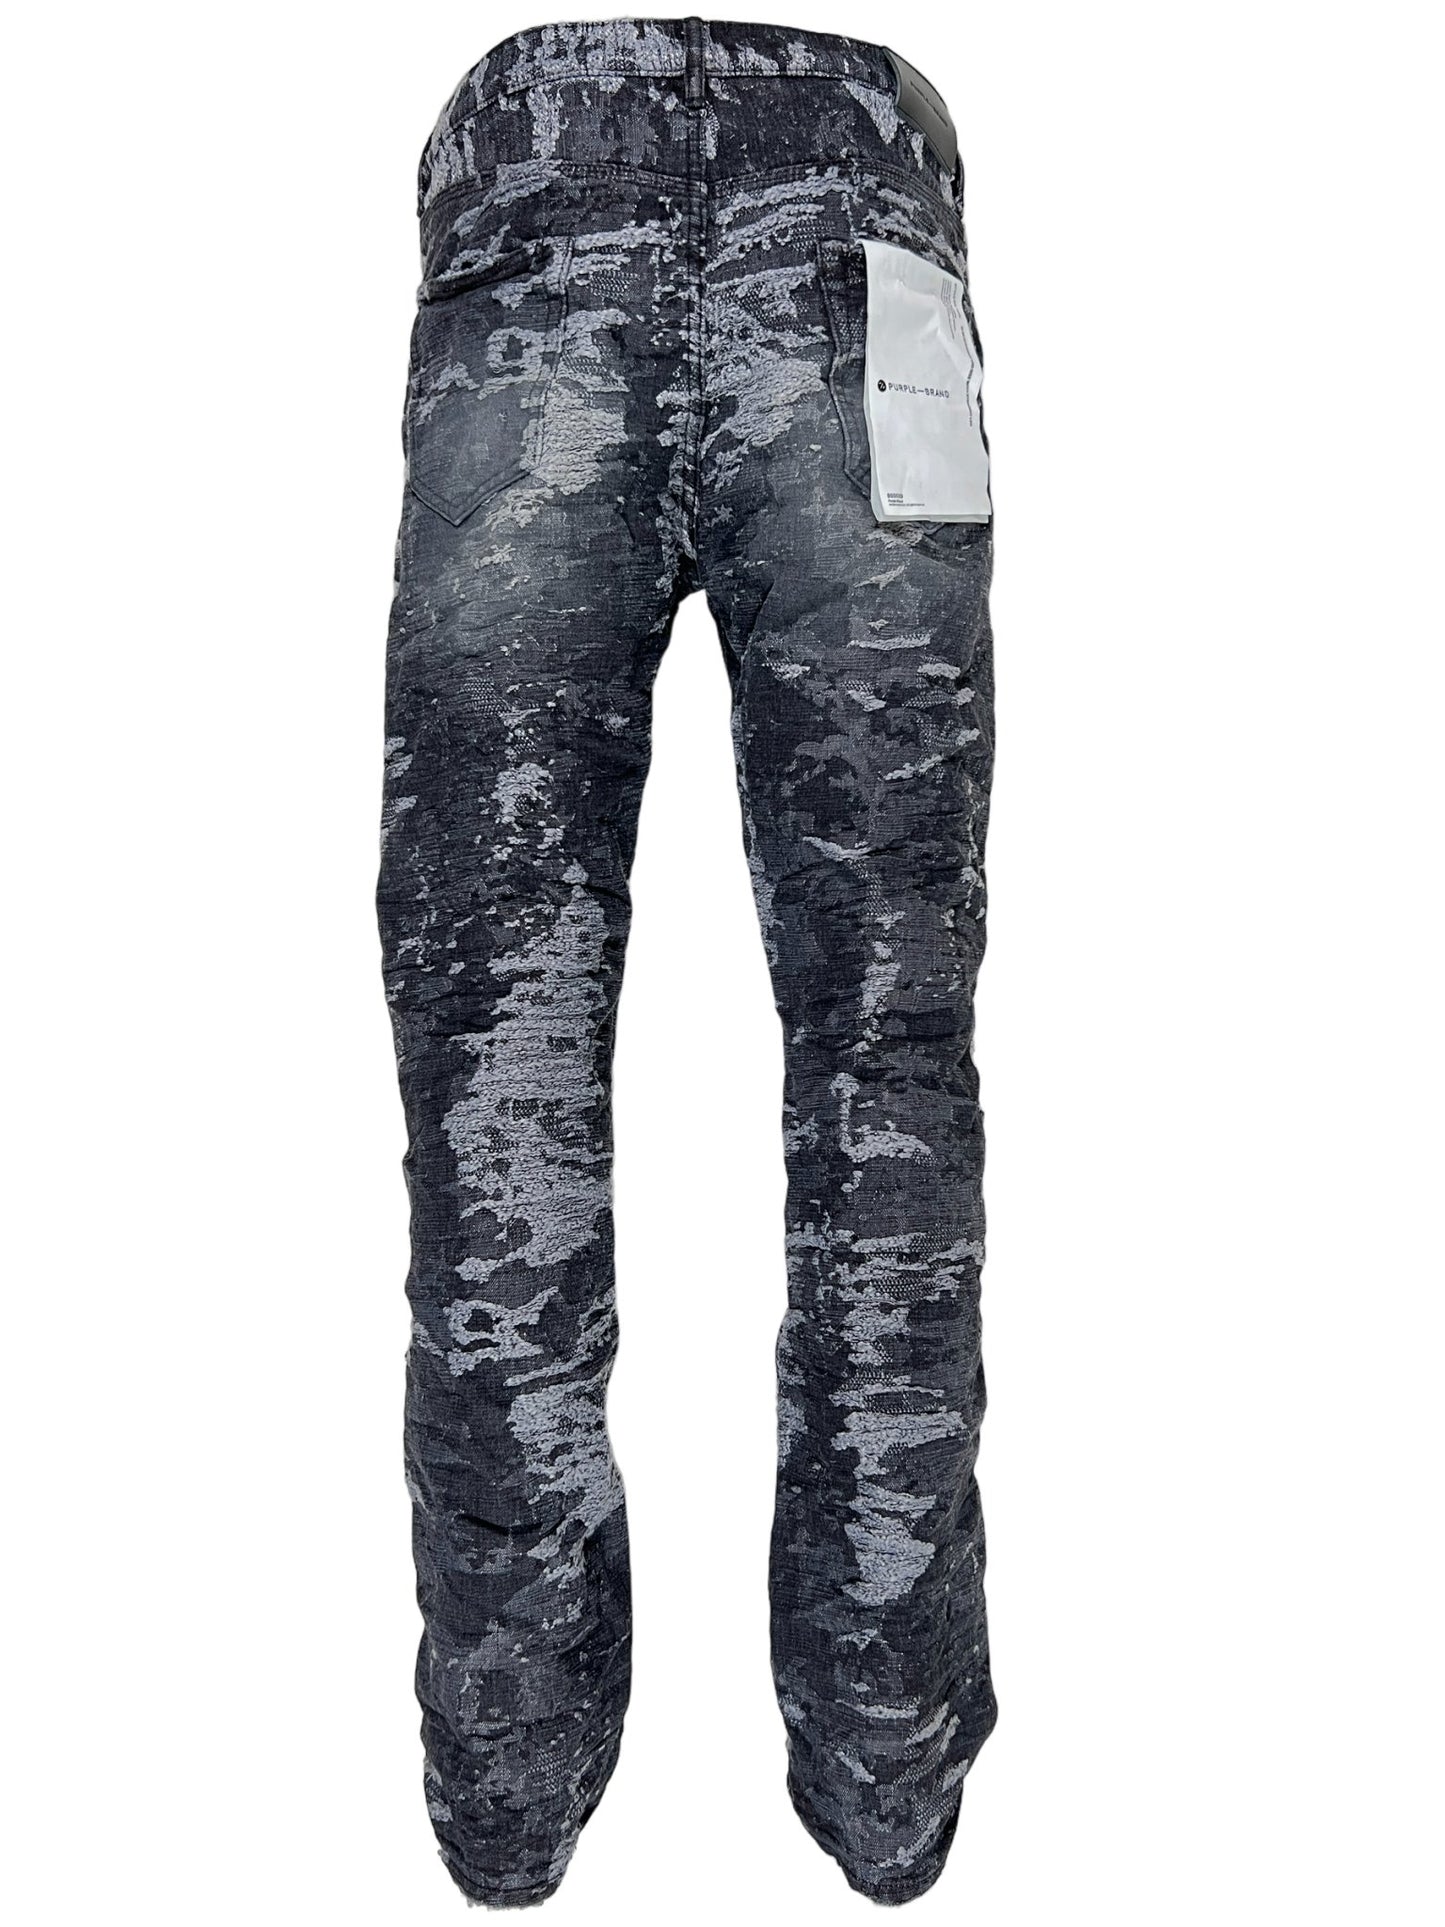 A pair of men's PURPLE BRAND JEANS P005-JJBL JACQUARD SLIM STRAIGHT with a camouflage pattern and reinforced belt loops.